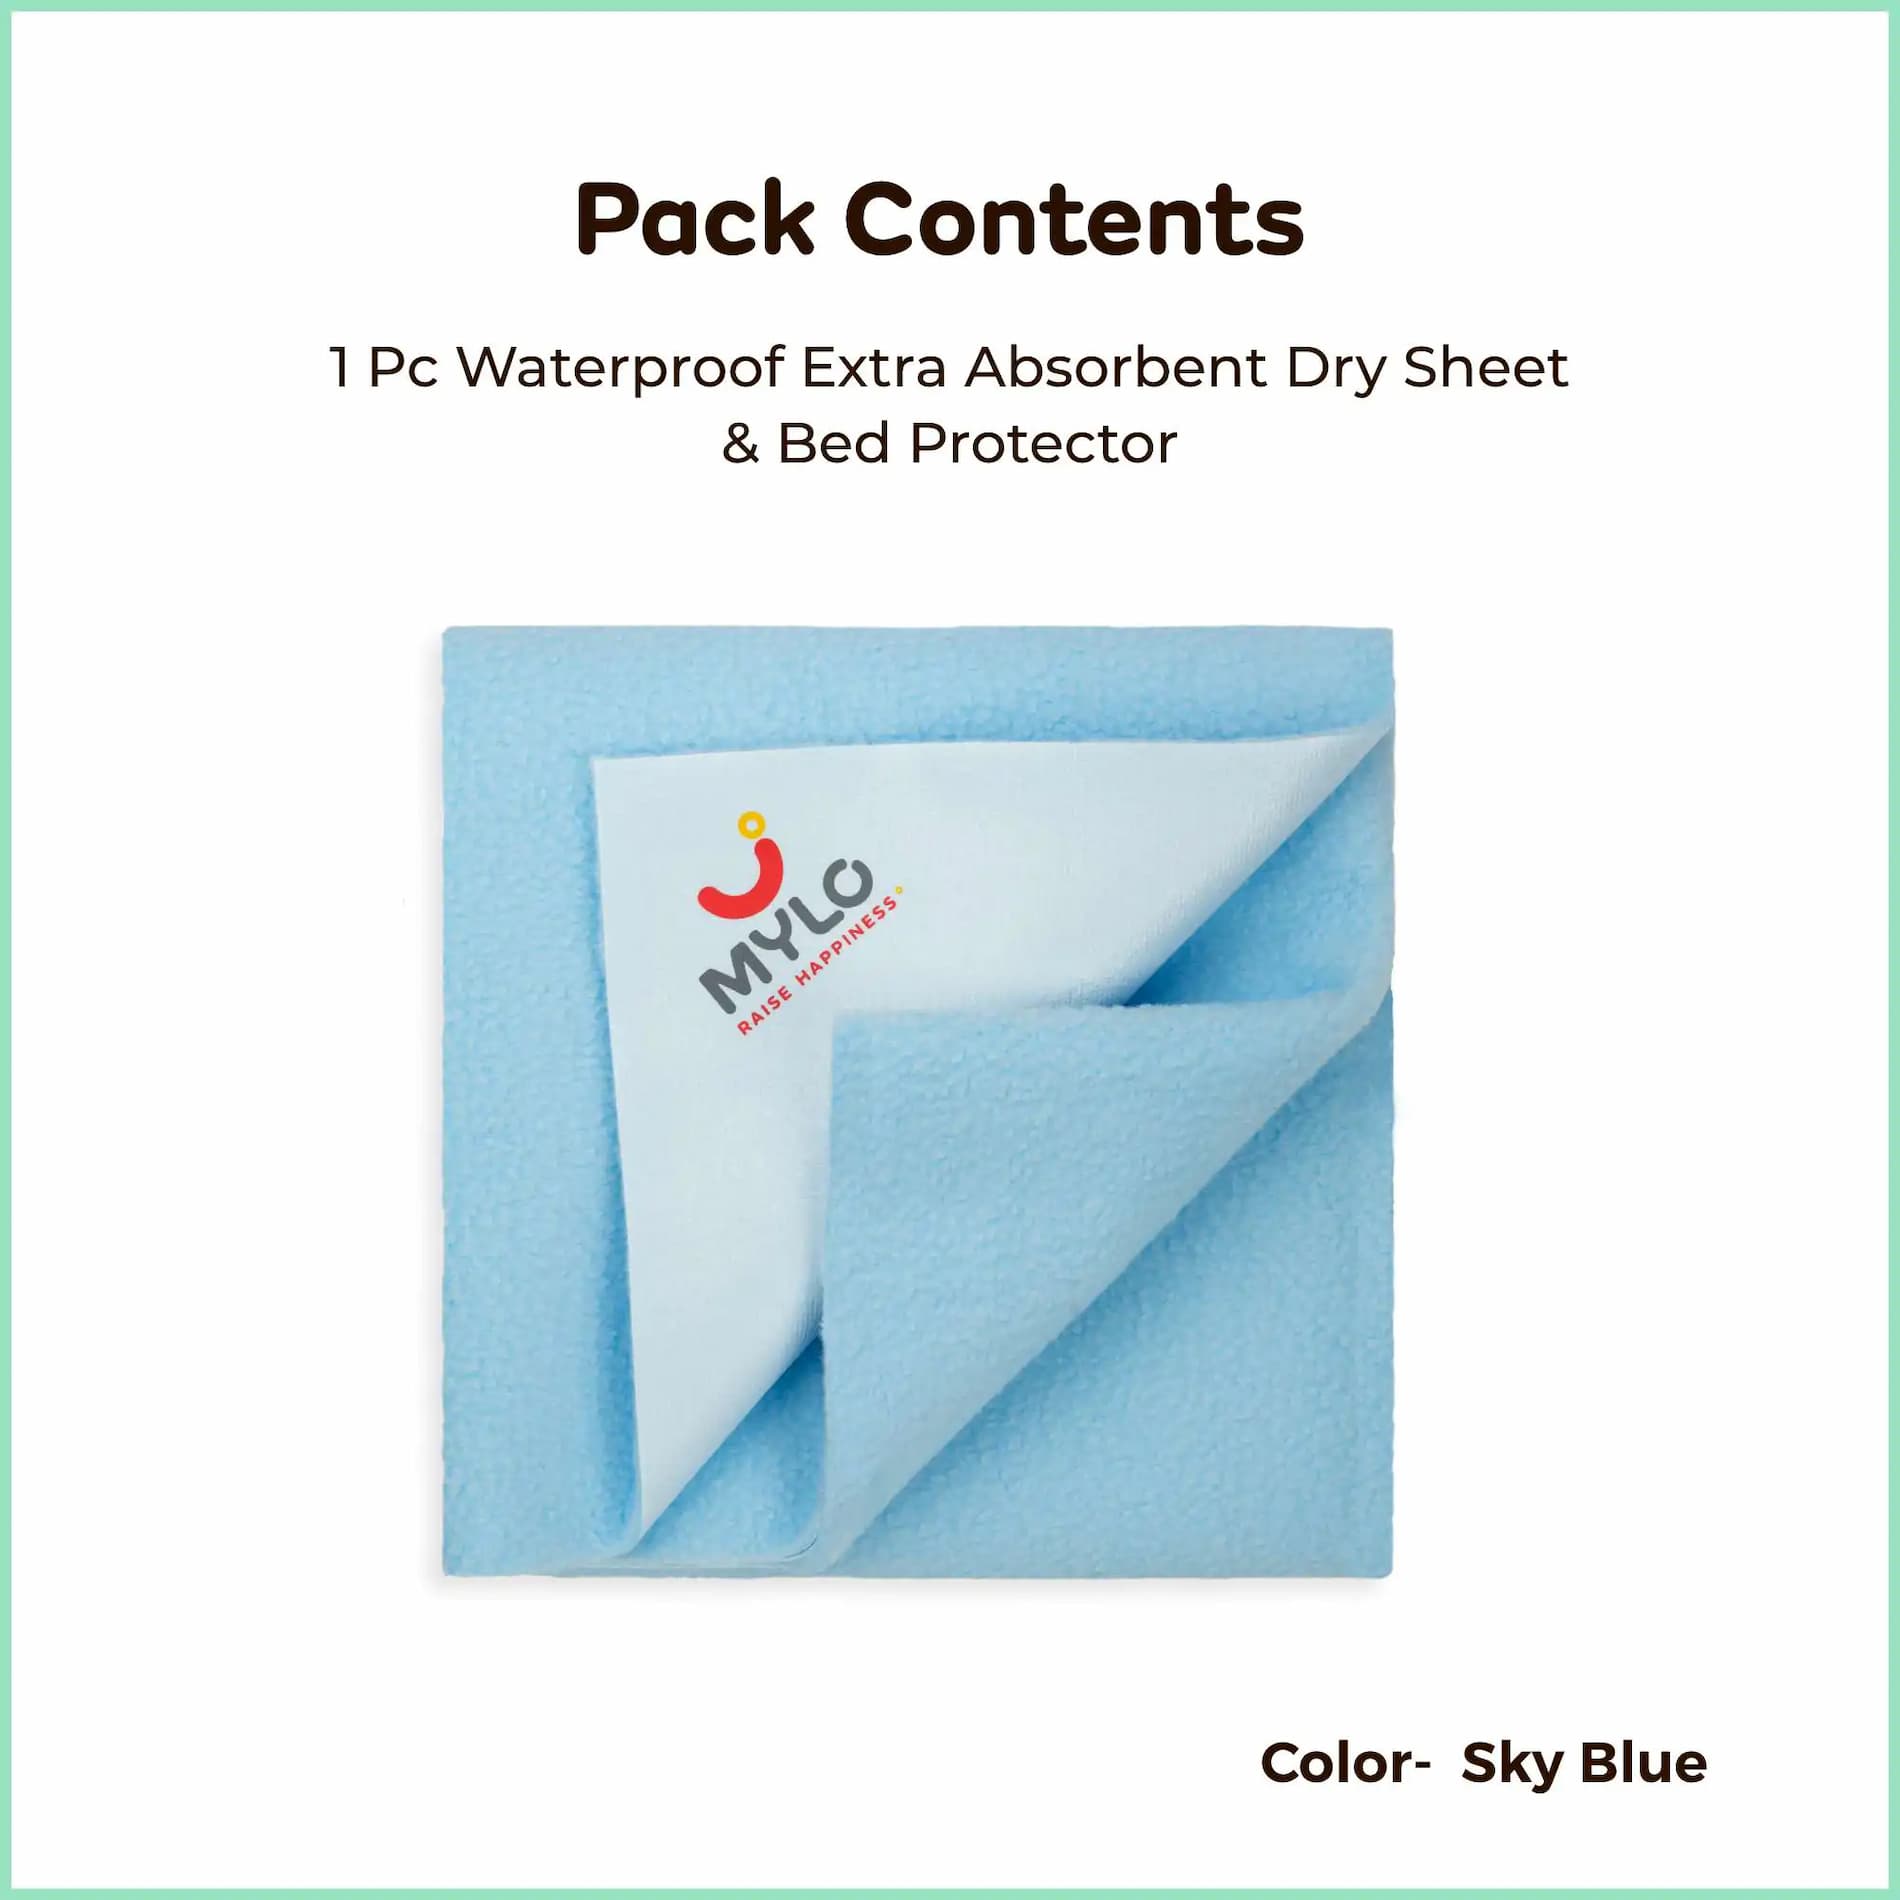 Waterproof Extra Absorbent Dry Sheet & Bed Protector - Sky Blue (M)